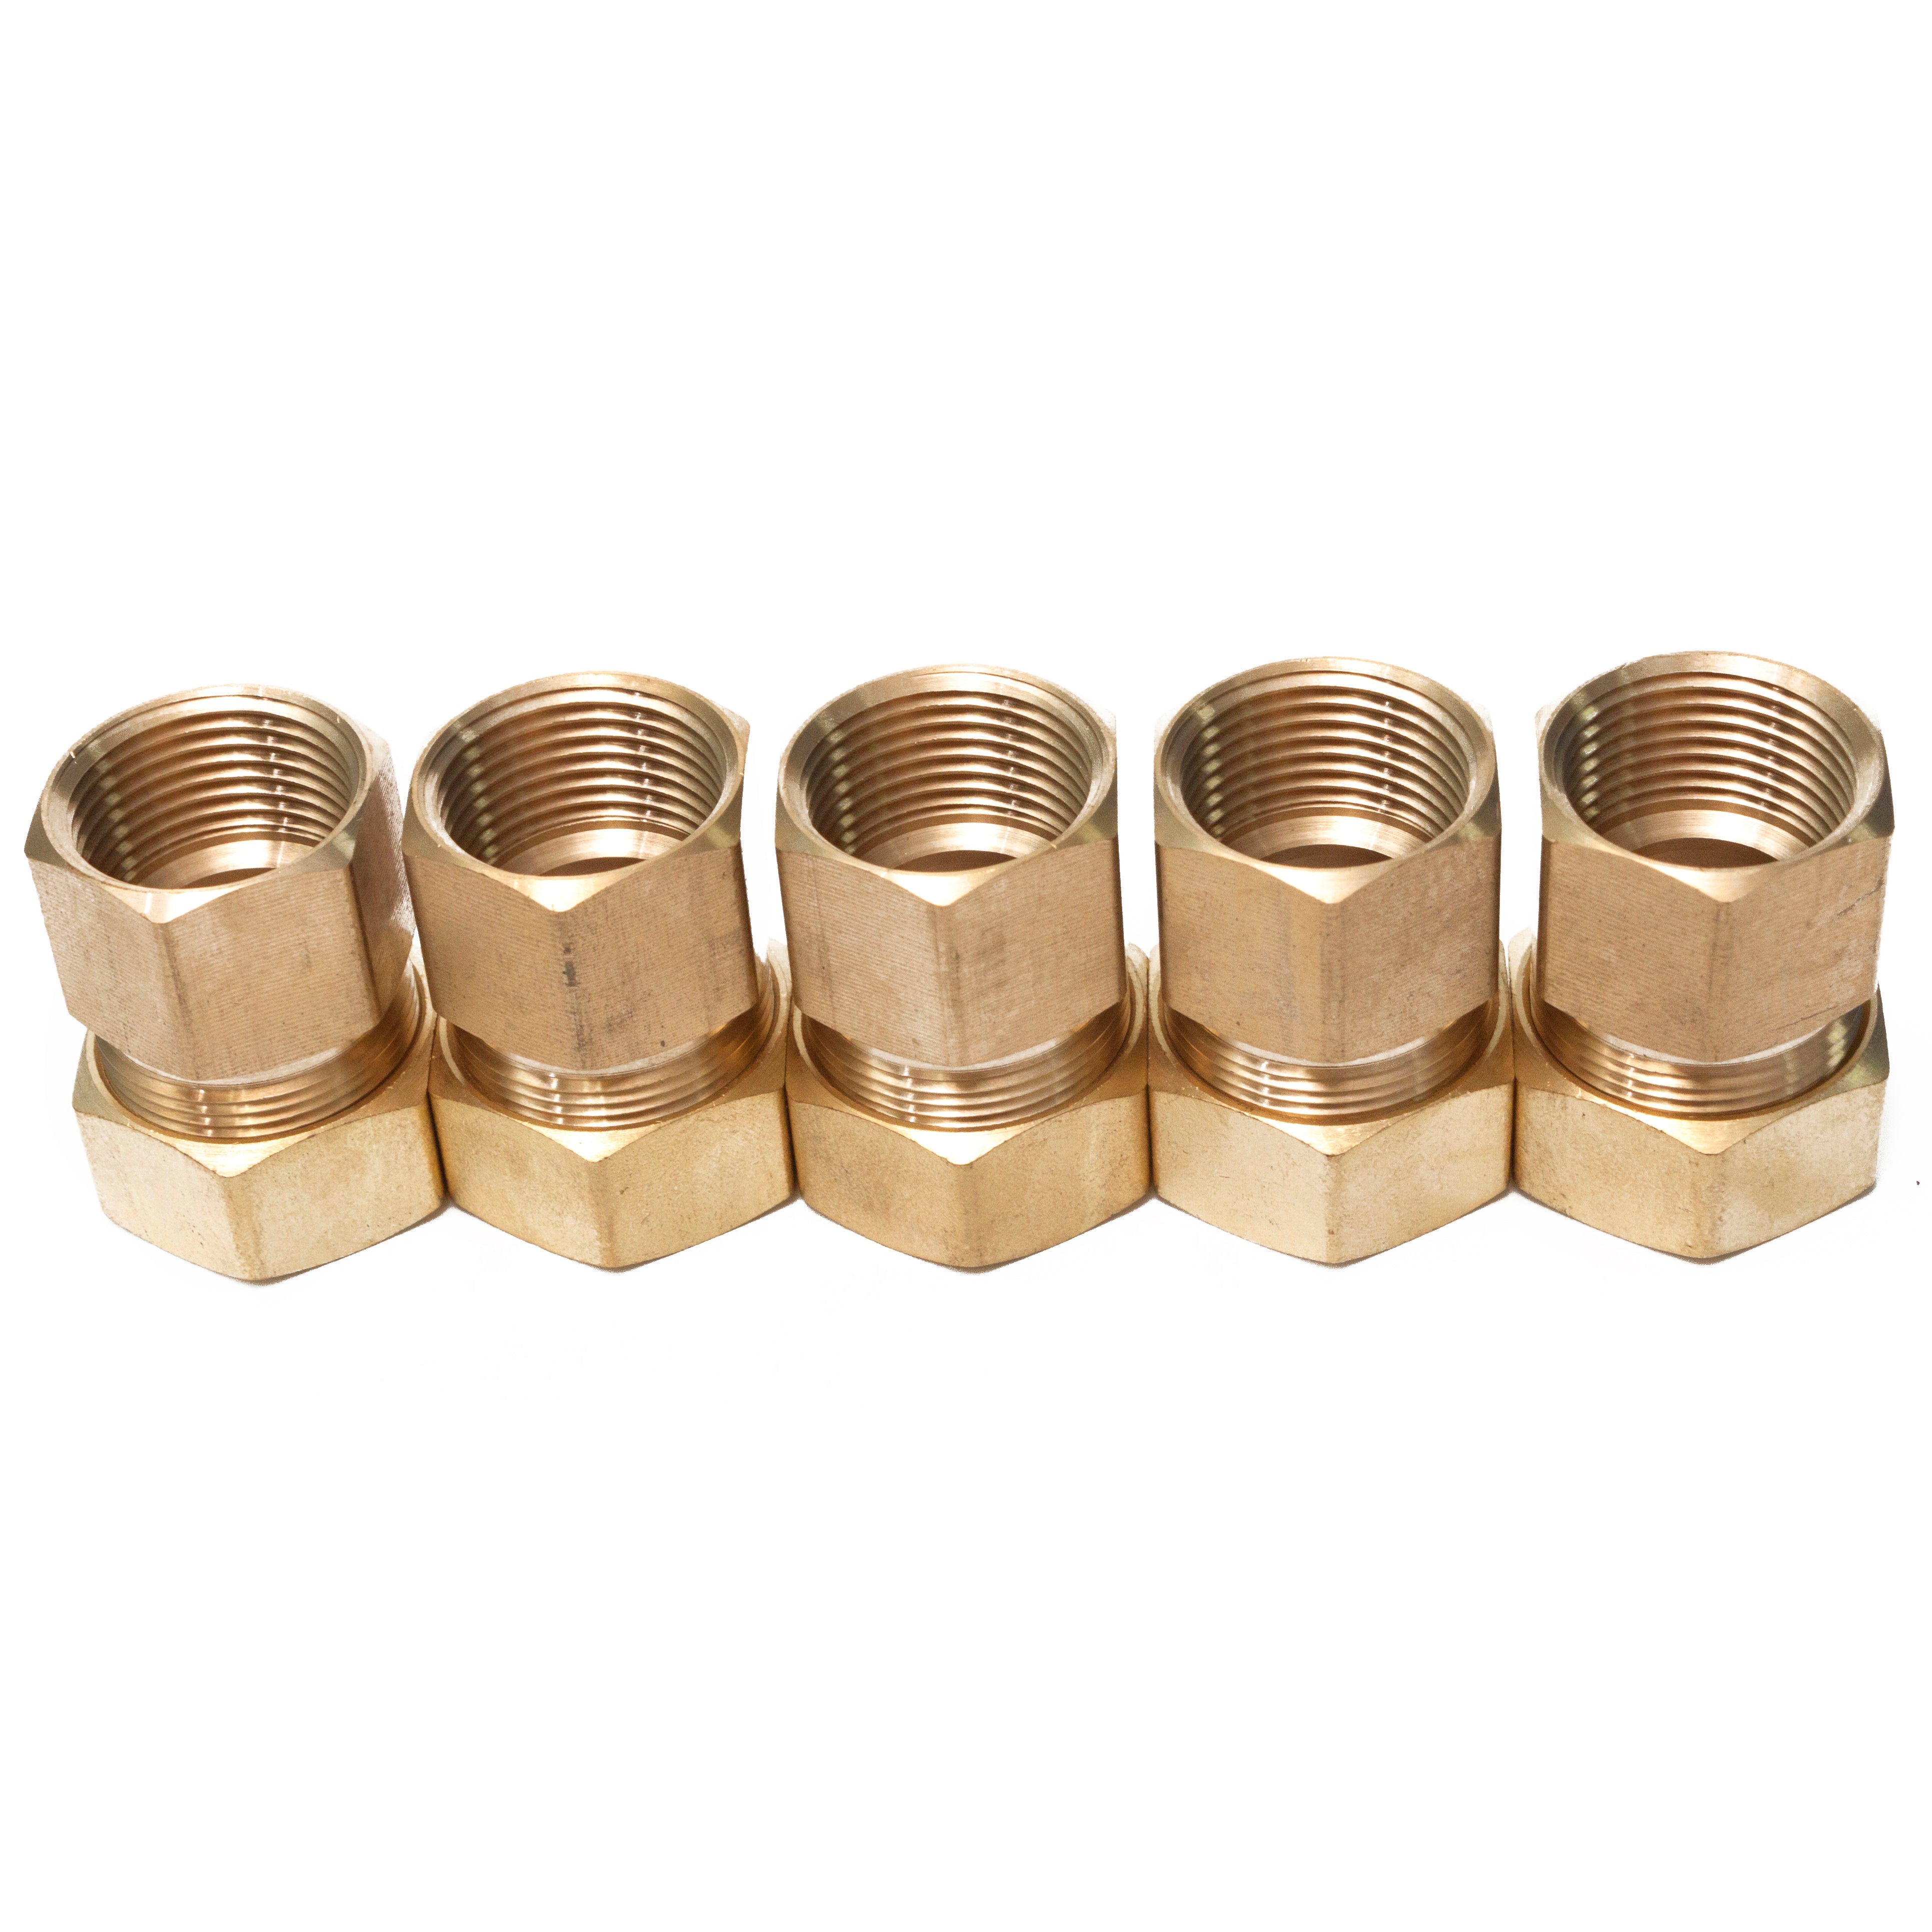 LTWFITTING Brass 7/8-Inch OD x 3/4-Inch Female NPT Compression Connector Fitting(Pack of 5)